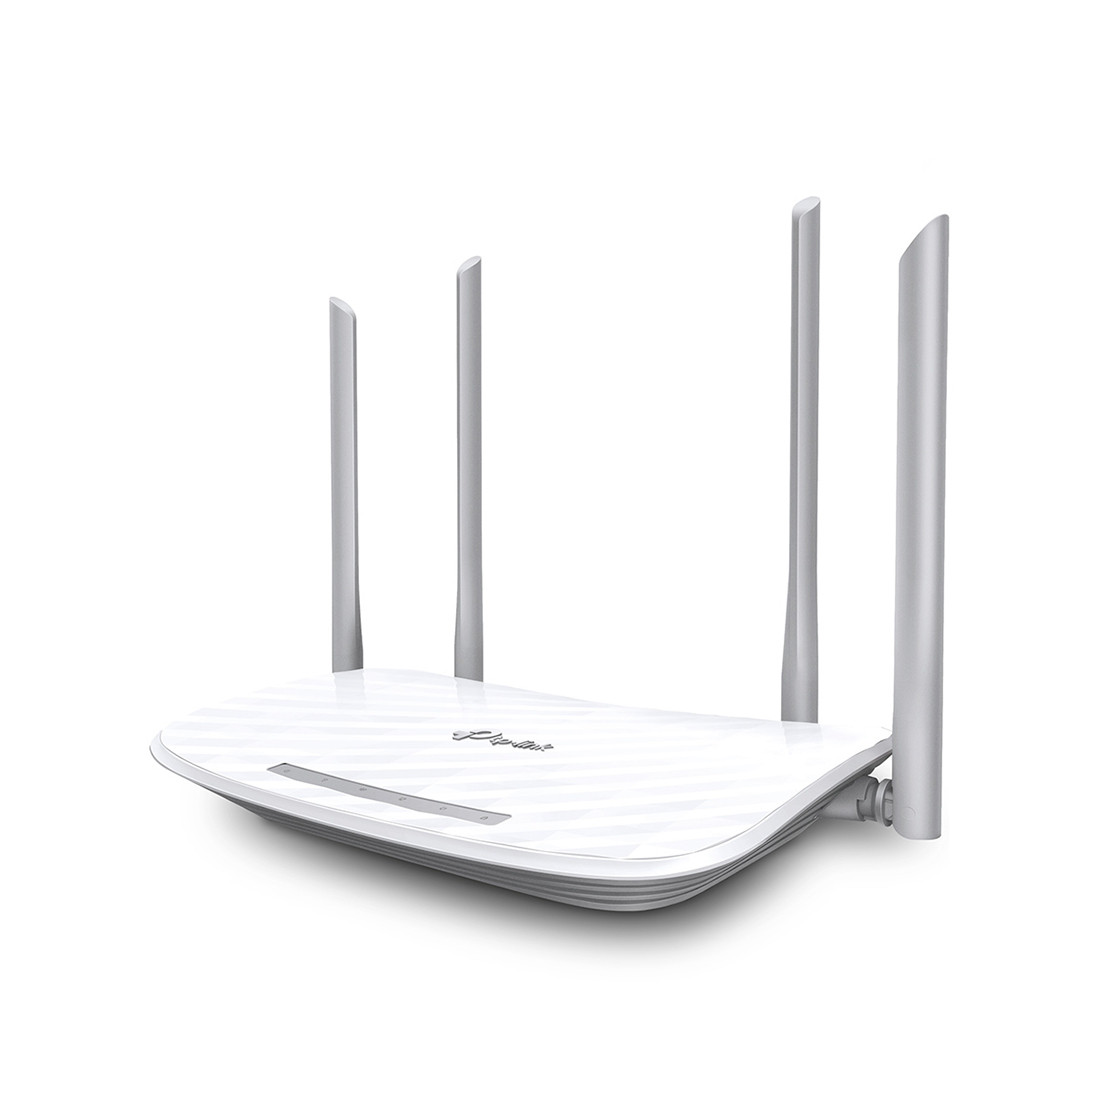 Маршрутизатор TP-Link Archer A5, фото 1